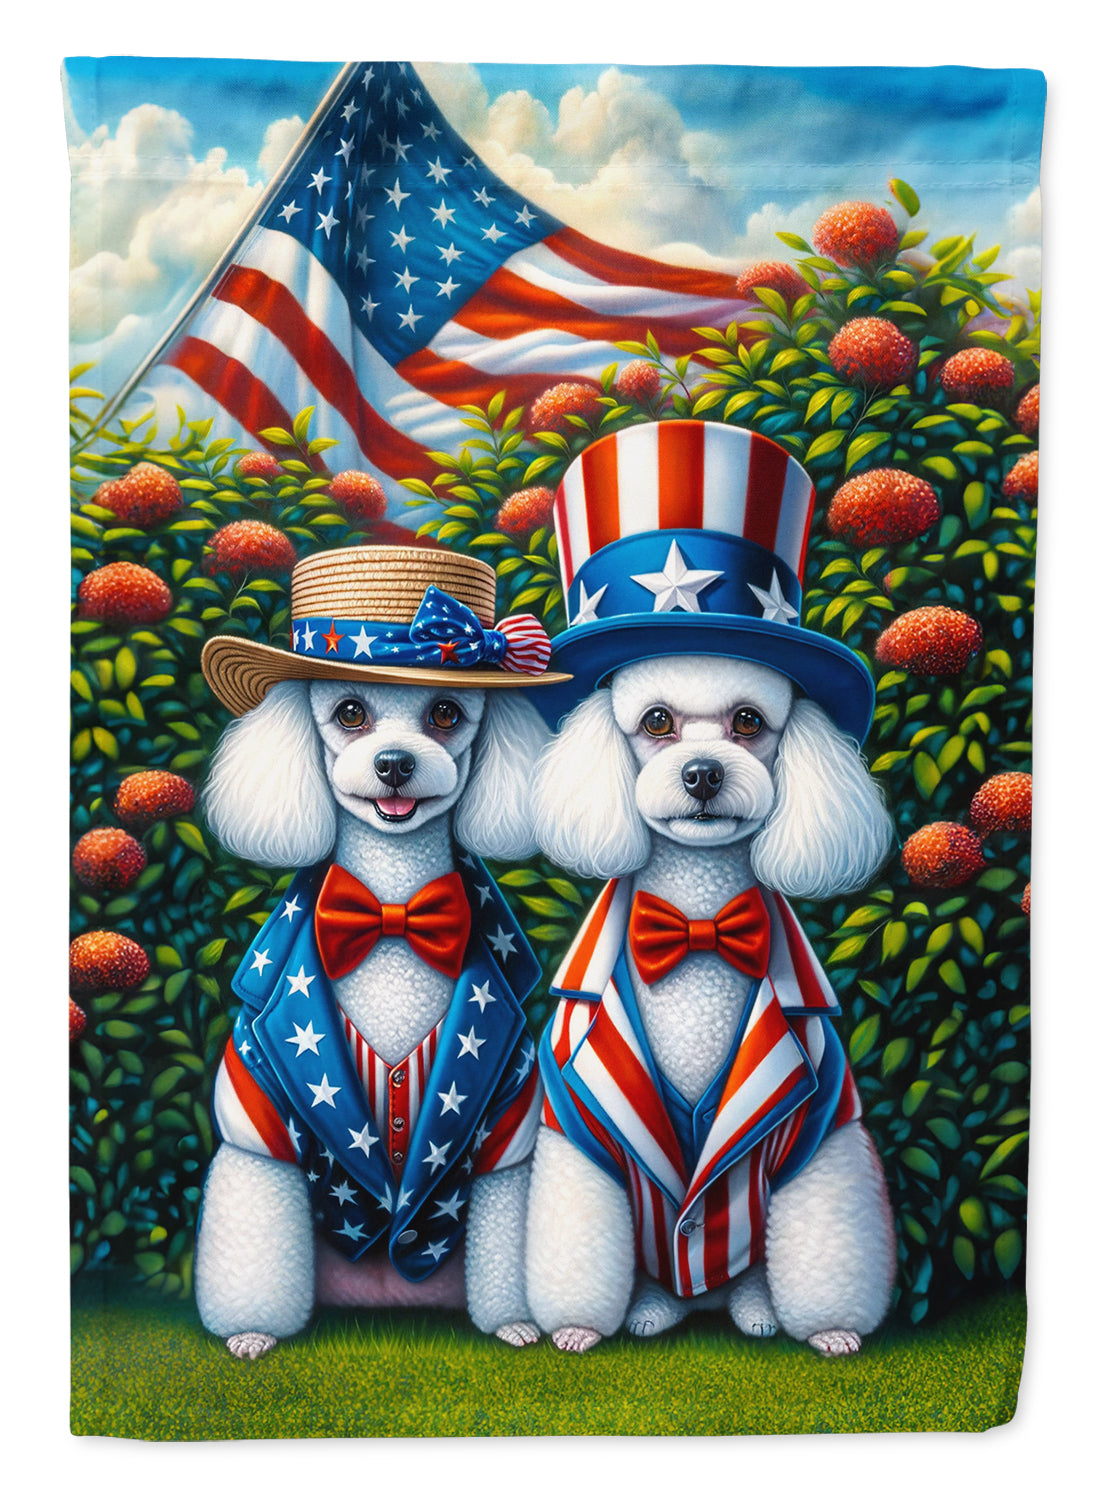 Buy this All American Poodle Garden Flag